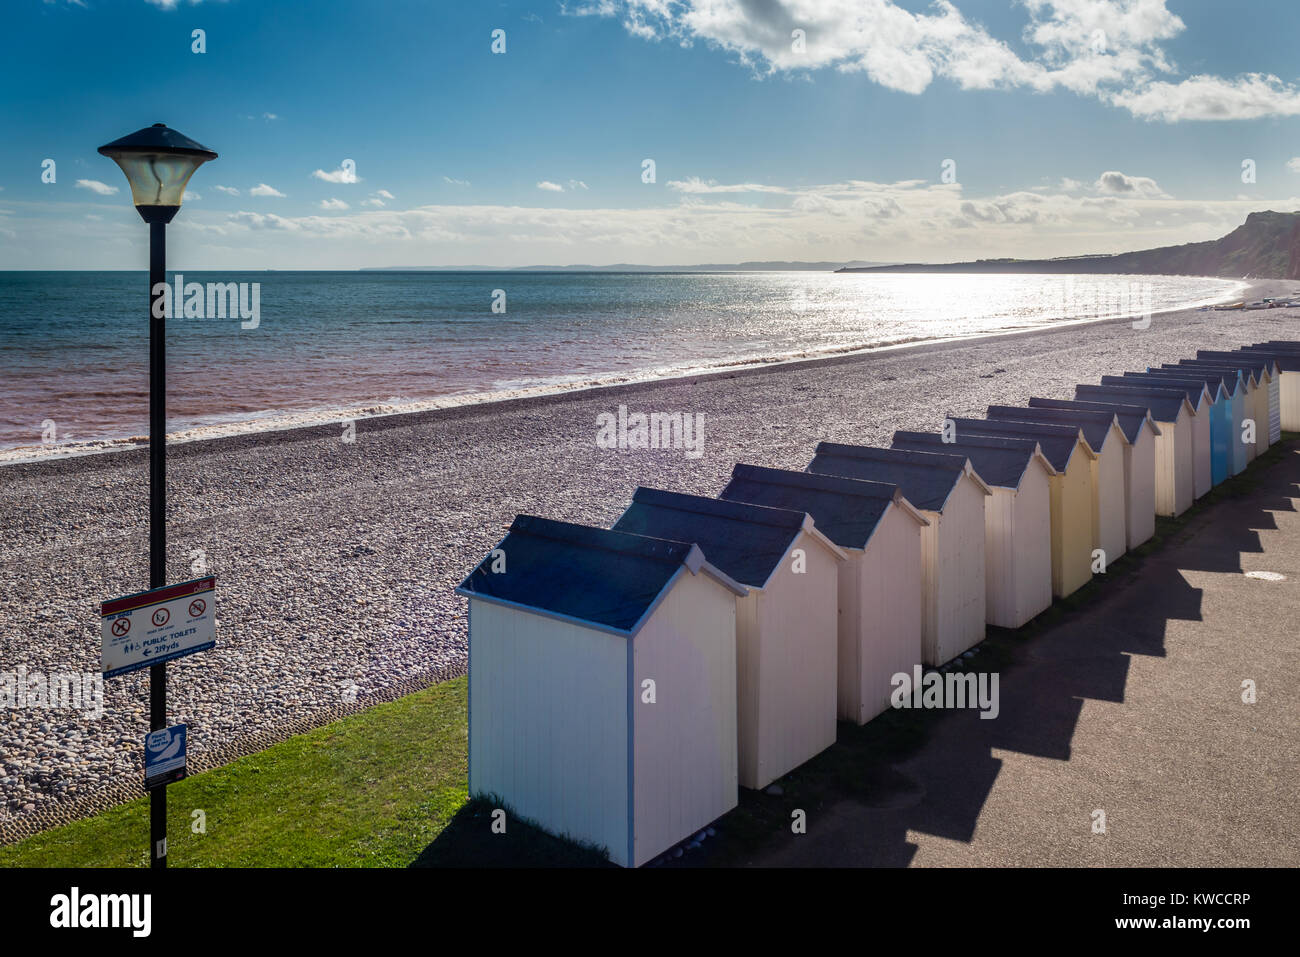 September on the beach and the tourists have gone home. Stock Photo